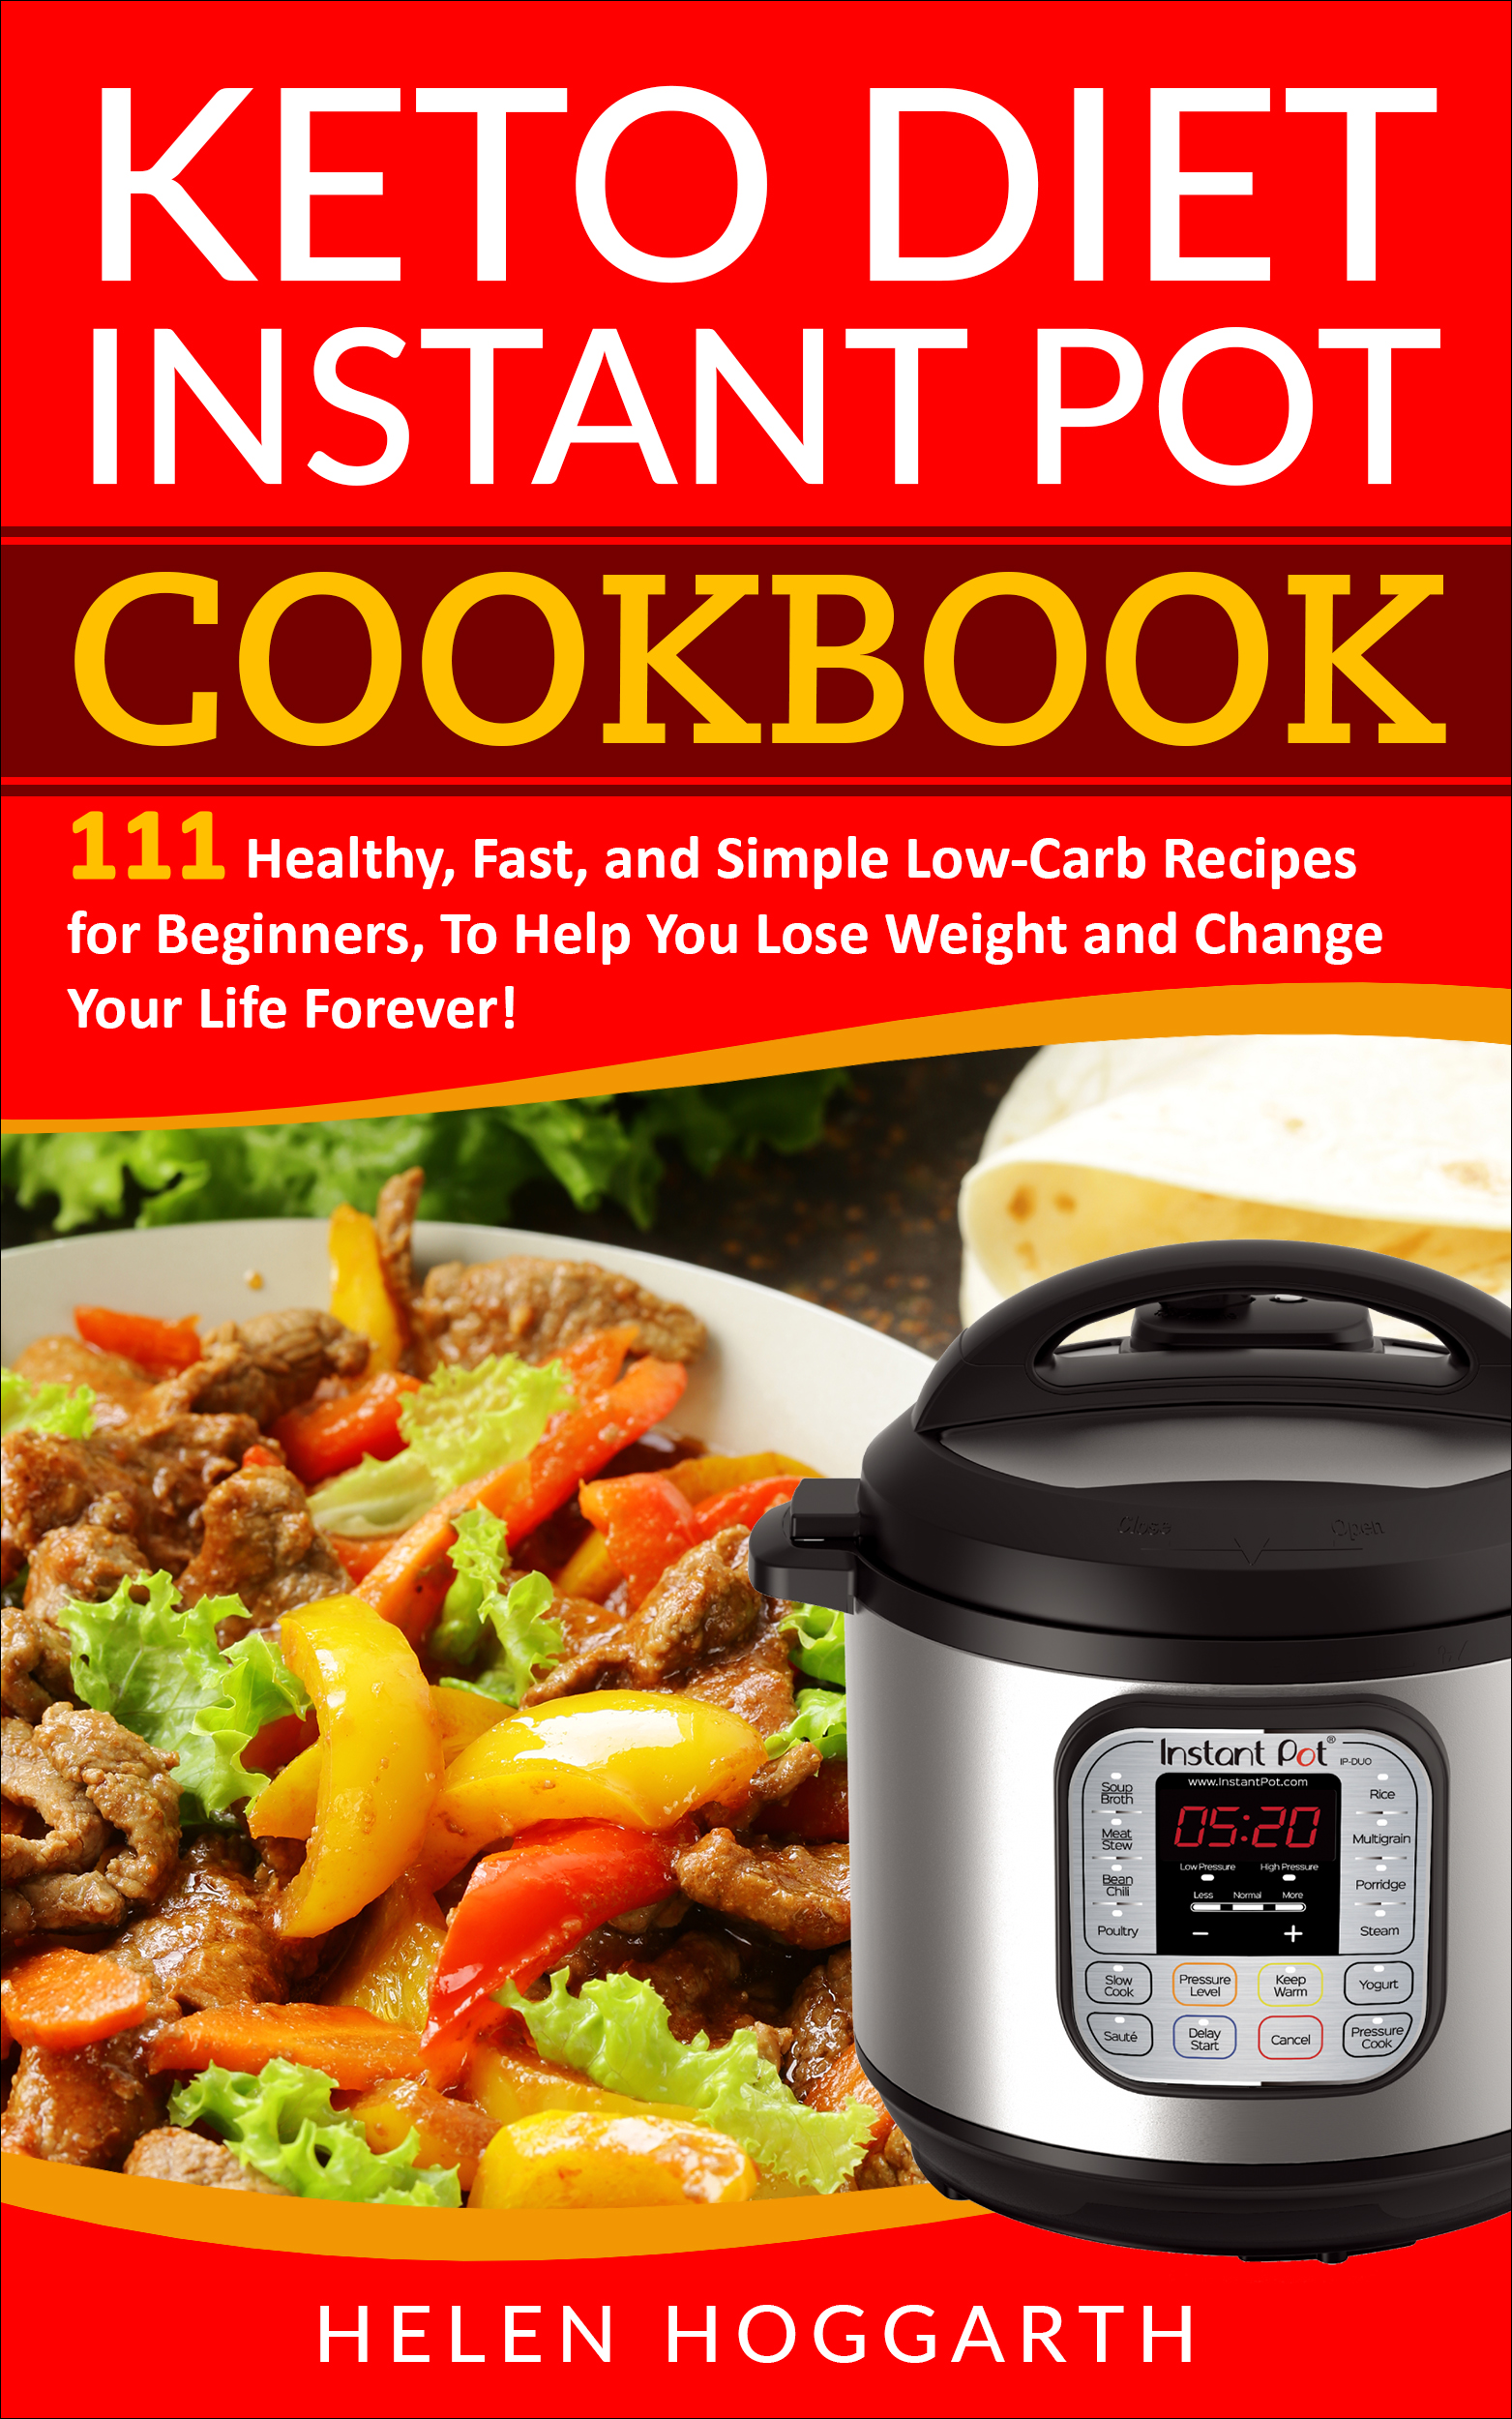 FREE: Keto Diet Instant Pot Cookbook: 111 Healthy, Fast, and Simple Low-Carb Recipes for Beginners, To Help You Lose Weight and Change Your Life Forever! by Helen Hoggarth